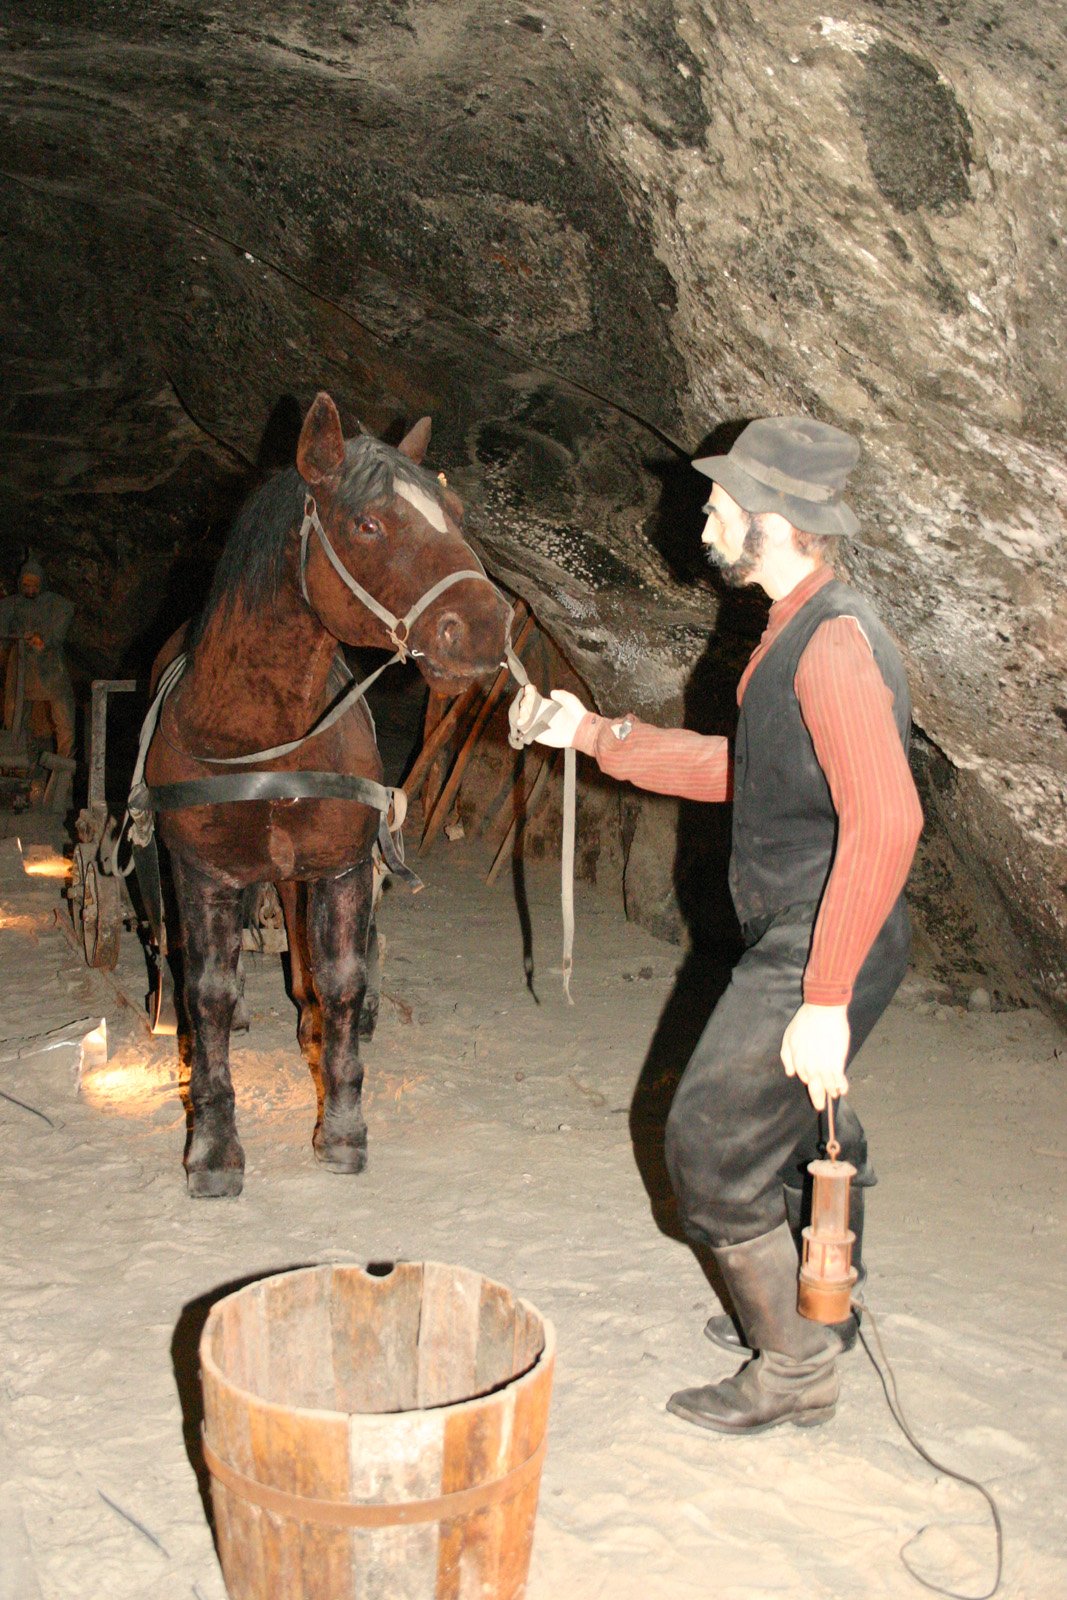 Horses in the mines..